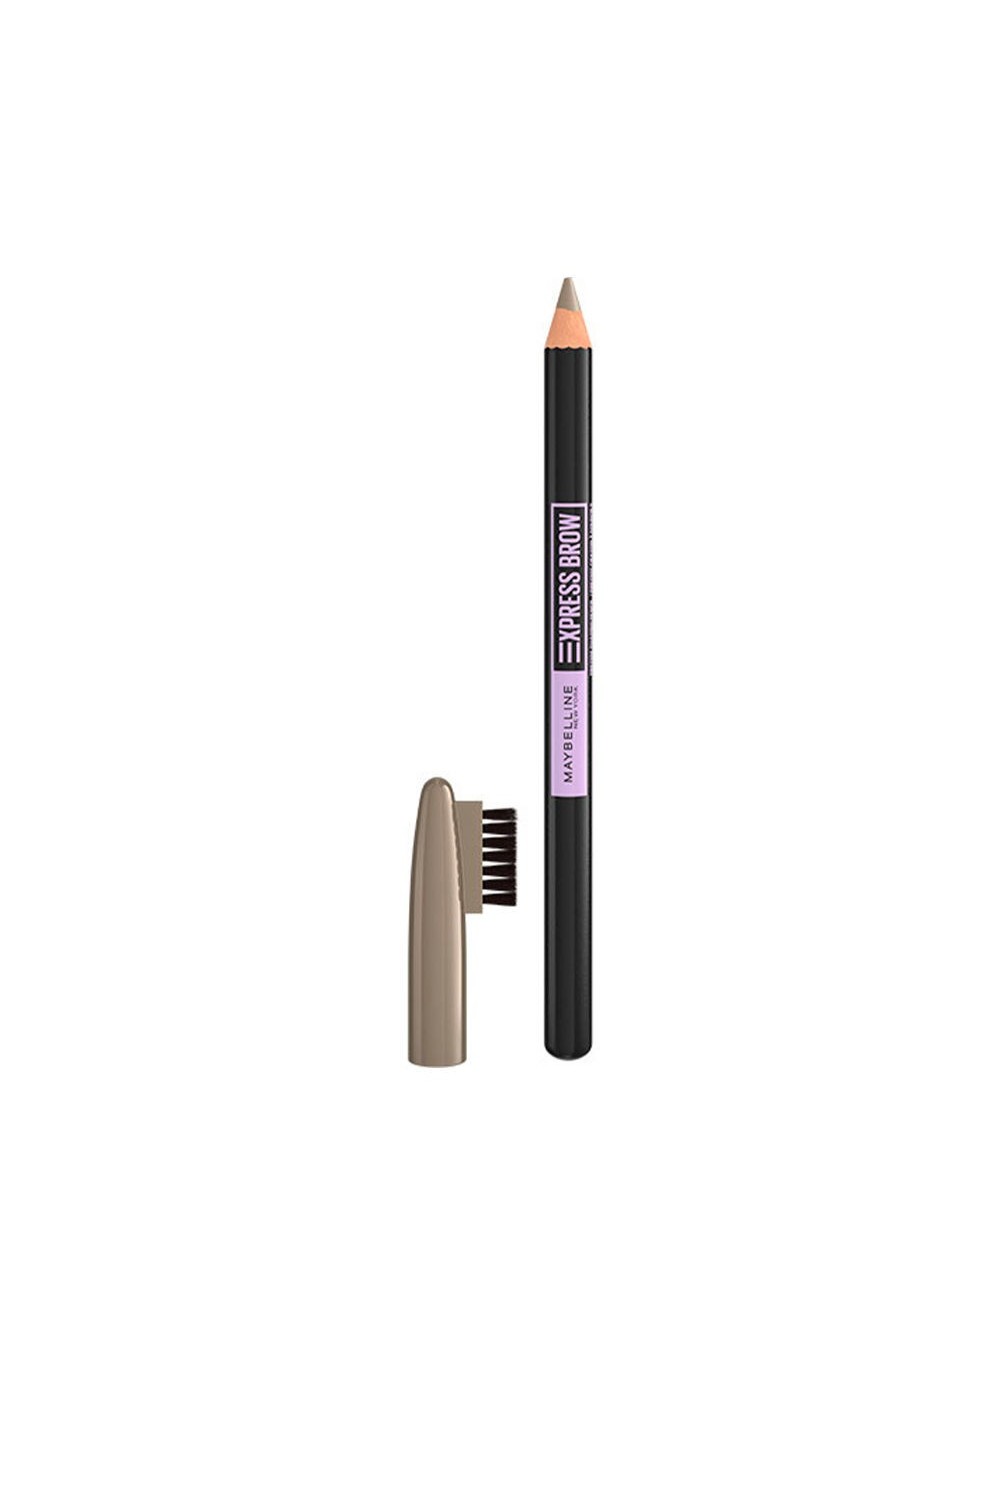 Maybelline Express Brow Eyebrow Pencil 02-Blonde 4,3g